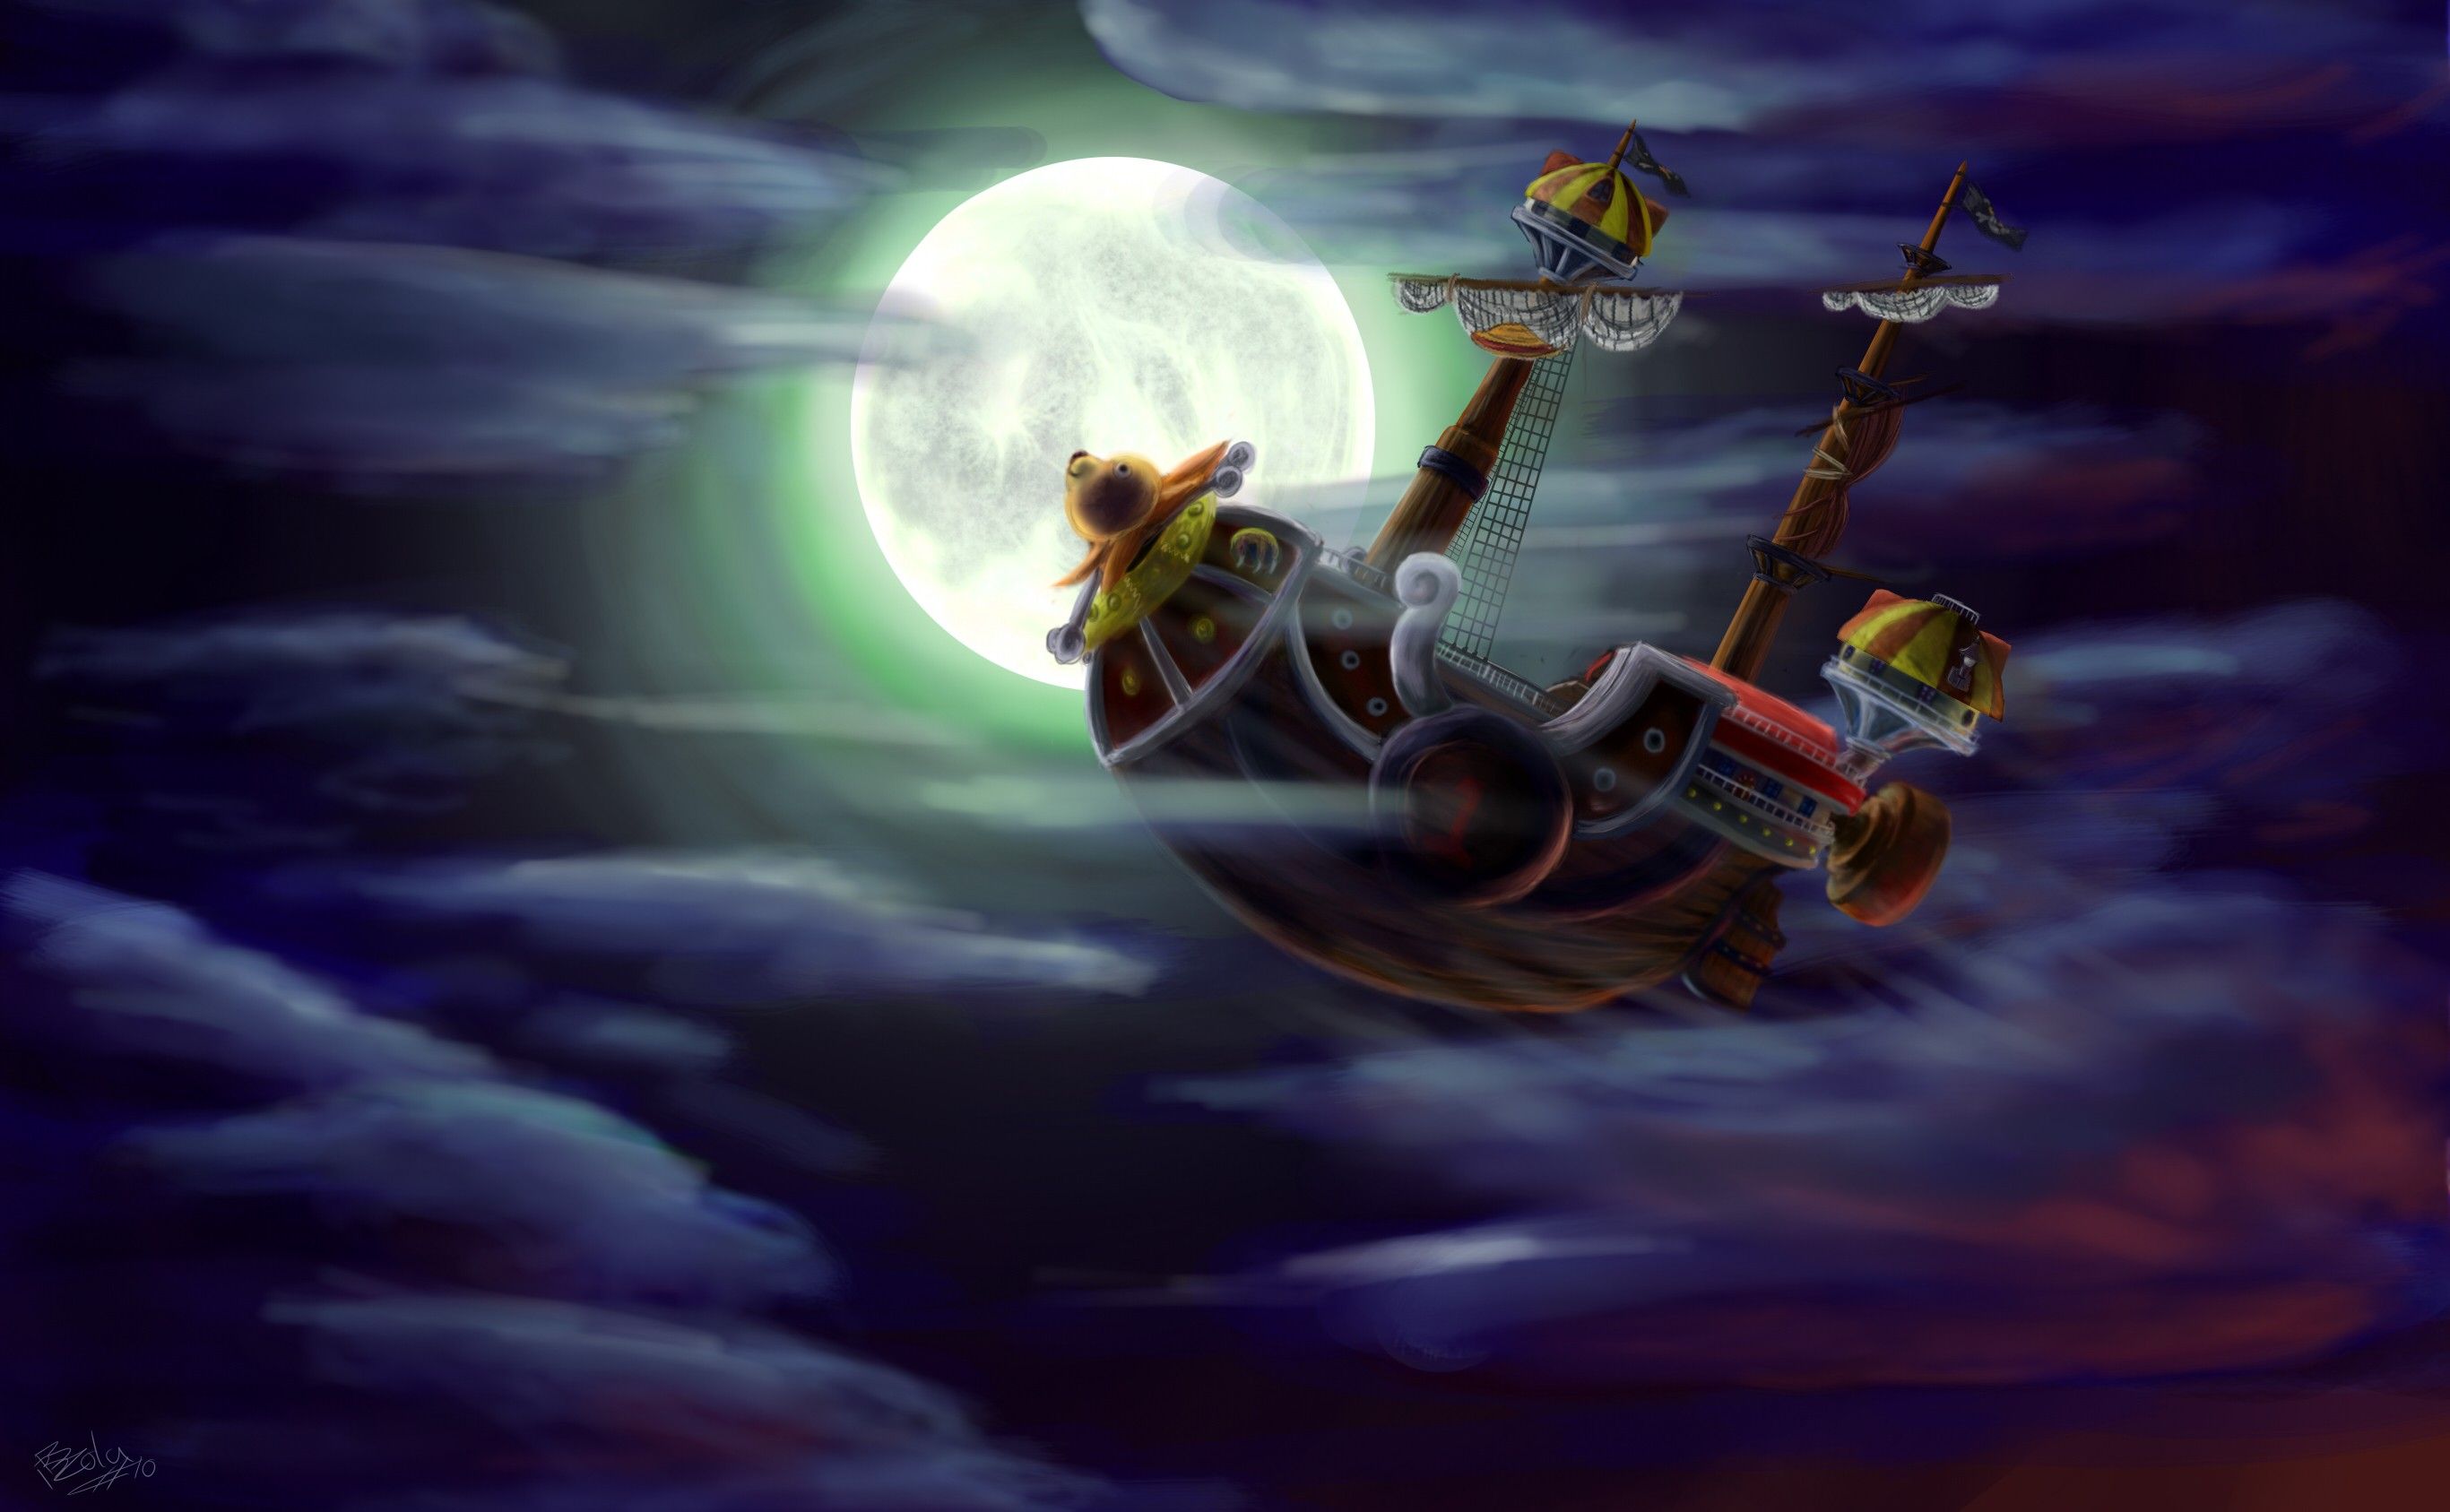 Wallpaper, One Piece, universe, mythology, ghost ship, Thousand Sunny, darkness, screenshot, computer wallpaper, atmosphere of earth, fictional character, outer space 2733x1687